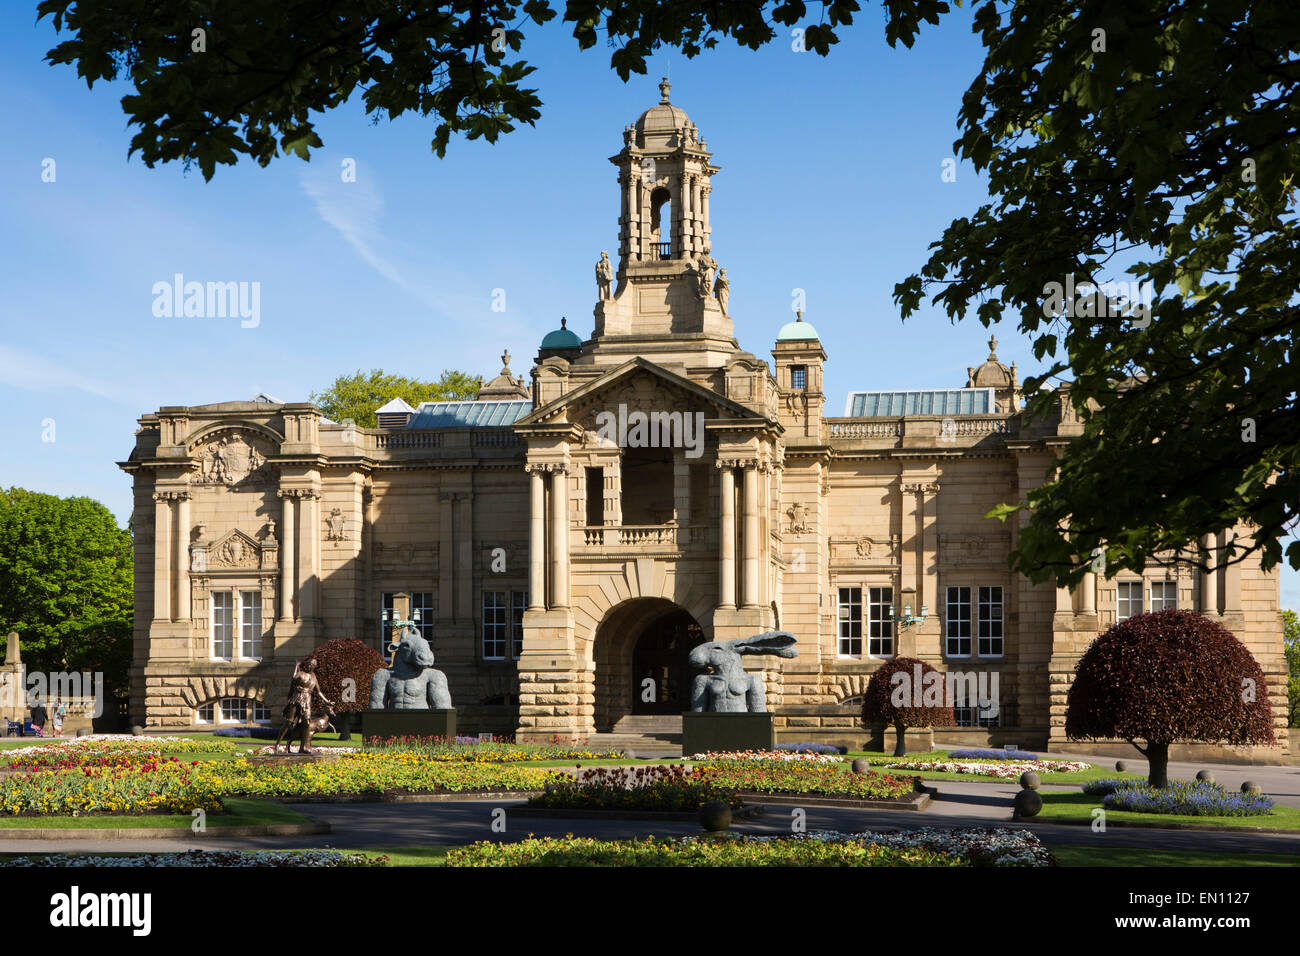 Royaume-uni, Angleterre, dans le Yorkshire, Bradford Lister Park, Carwtright Hall Civic Art Gallery Banque D'Images